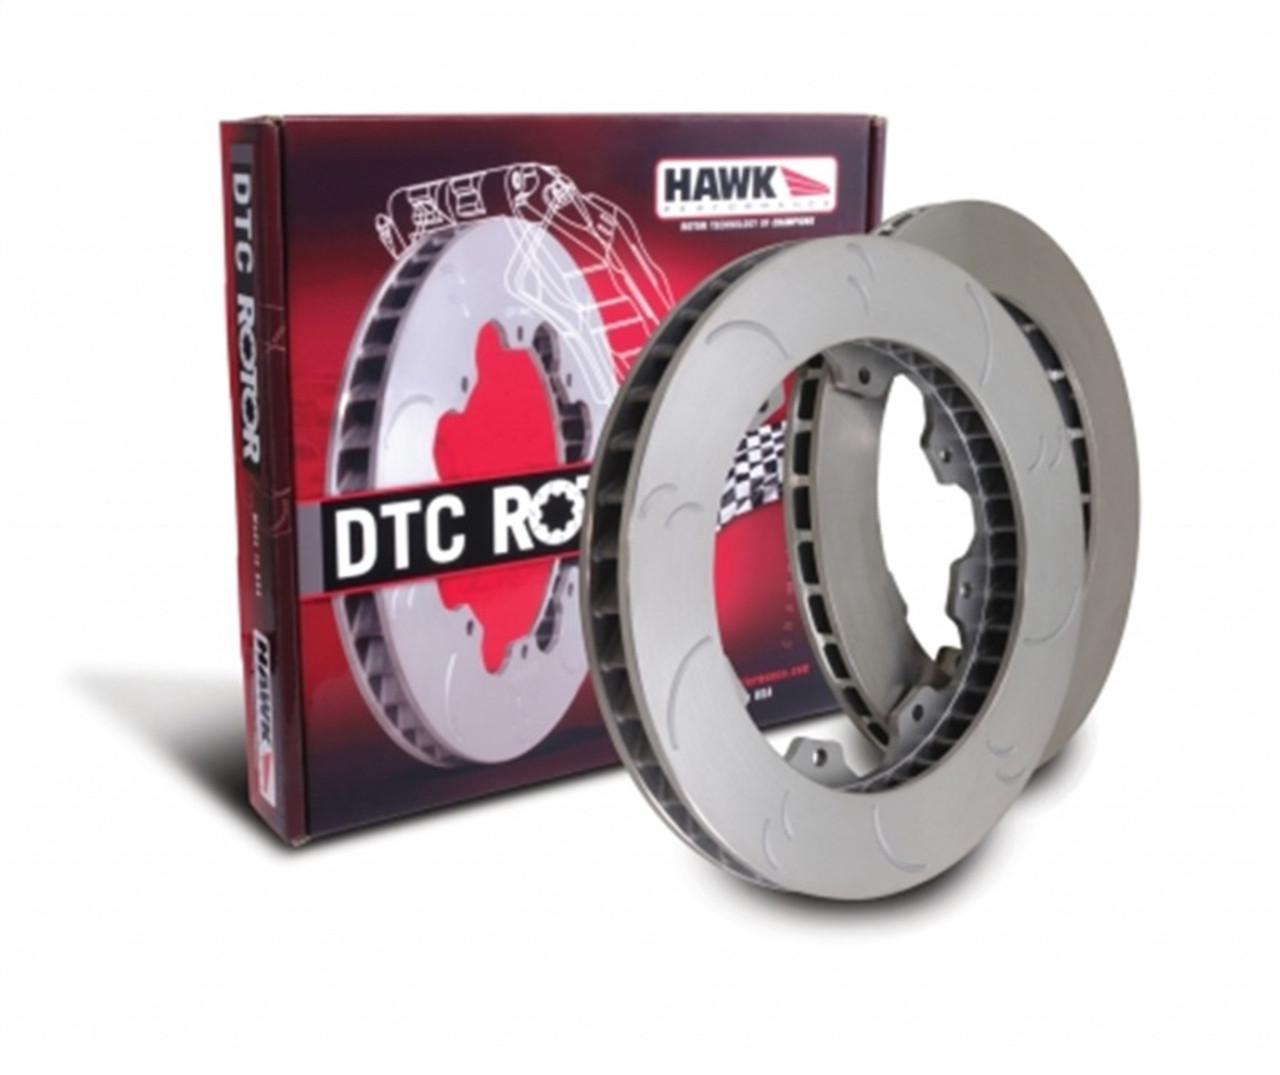 Hawk DTC 12.88in Diameter Left 12 bolt Directional w/ Gas Vents - HR8031L Photo - Primary